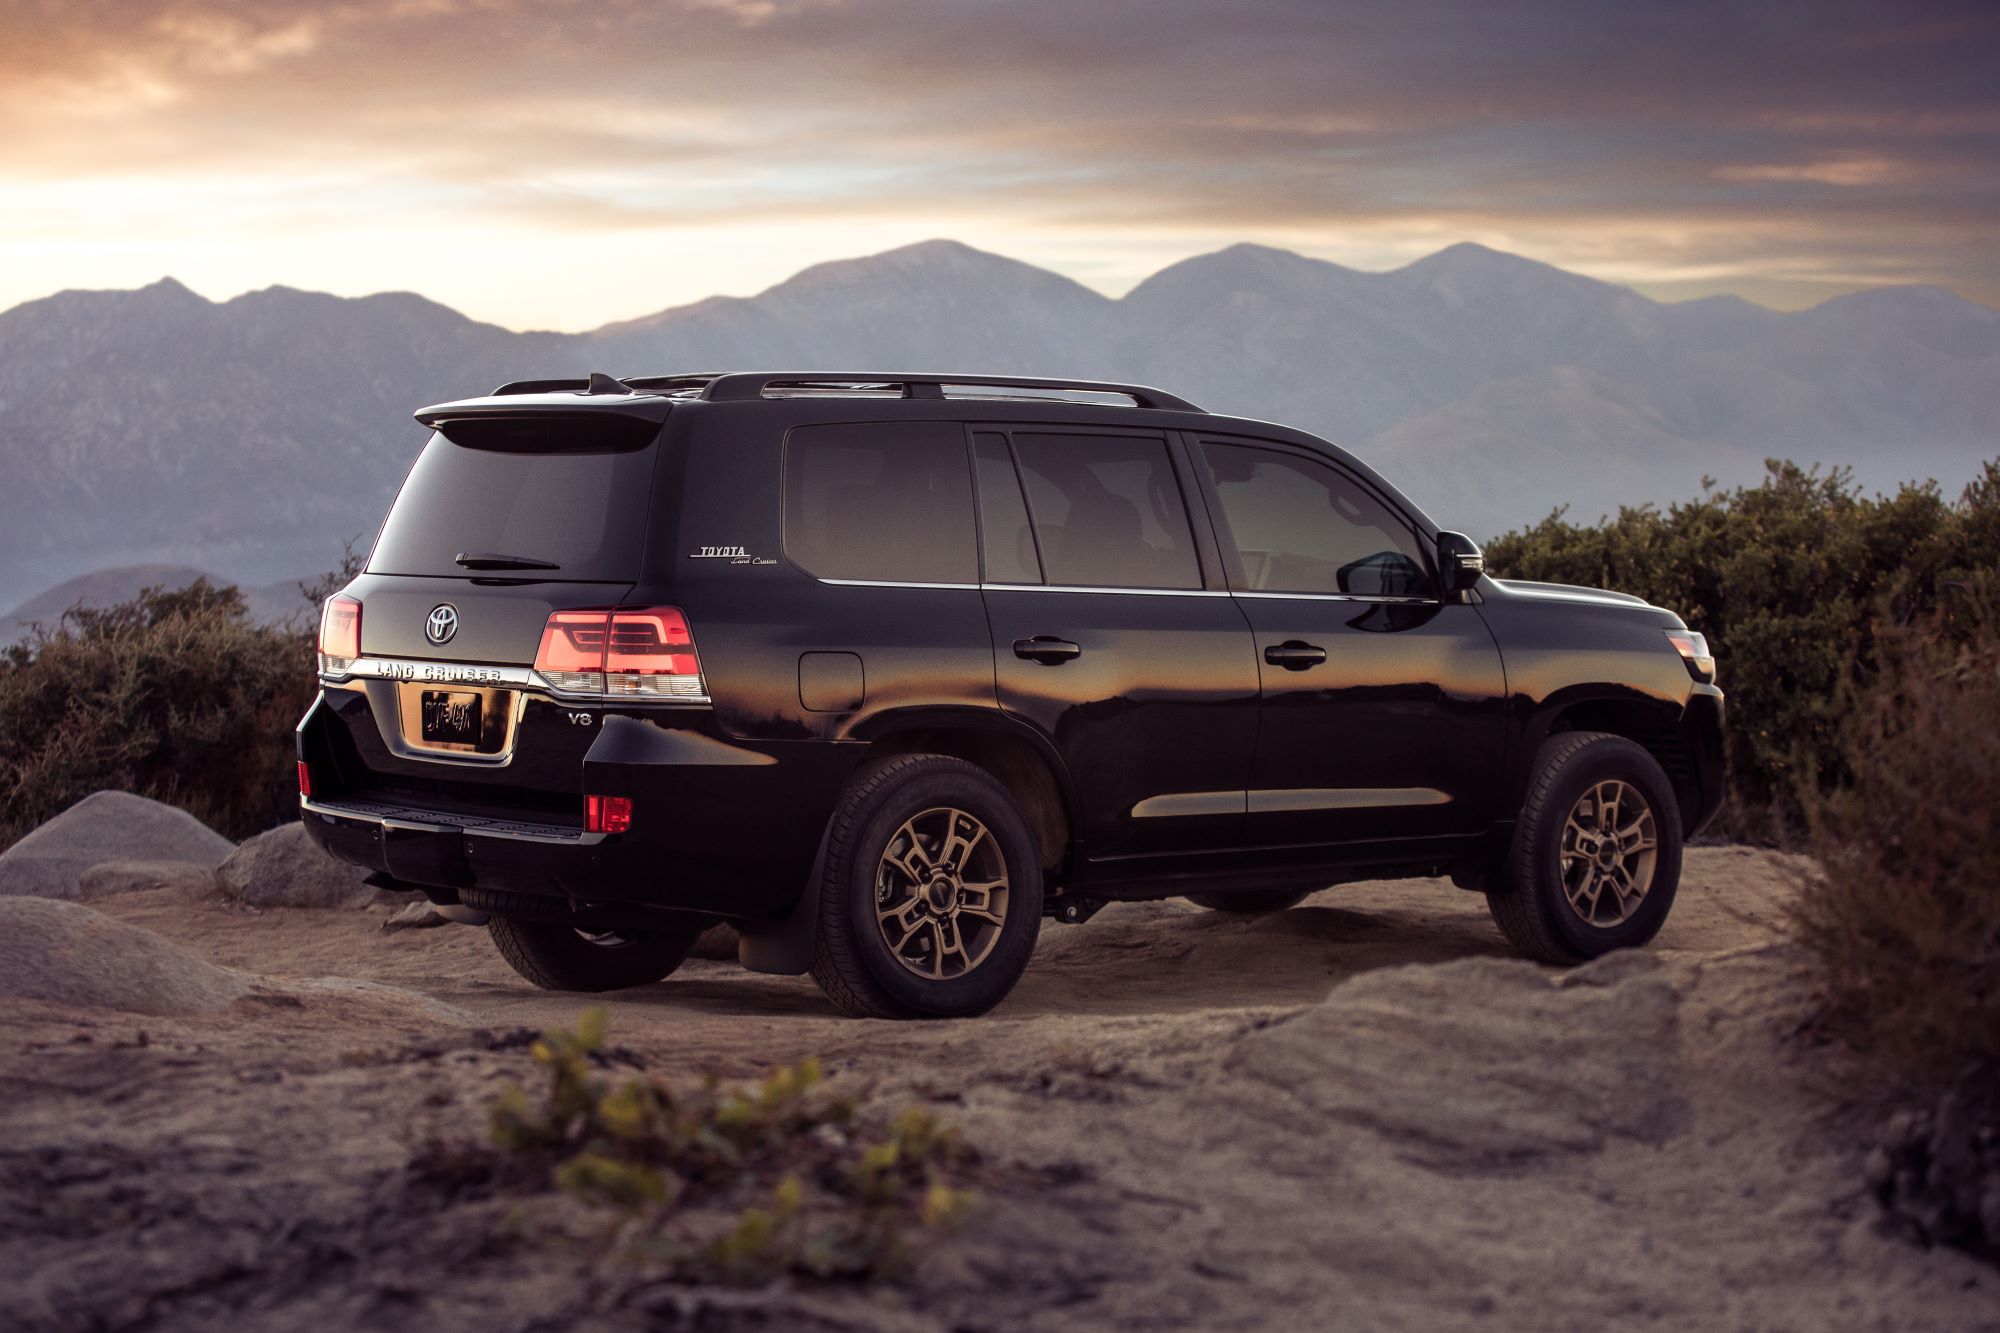 A 2021 Toyota Land Cruiser SUV parked on a rocky plain as the sun sets over a mountain range